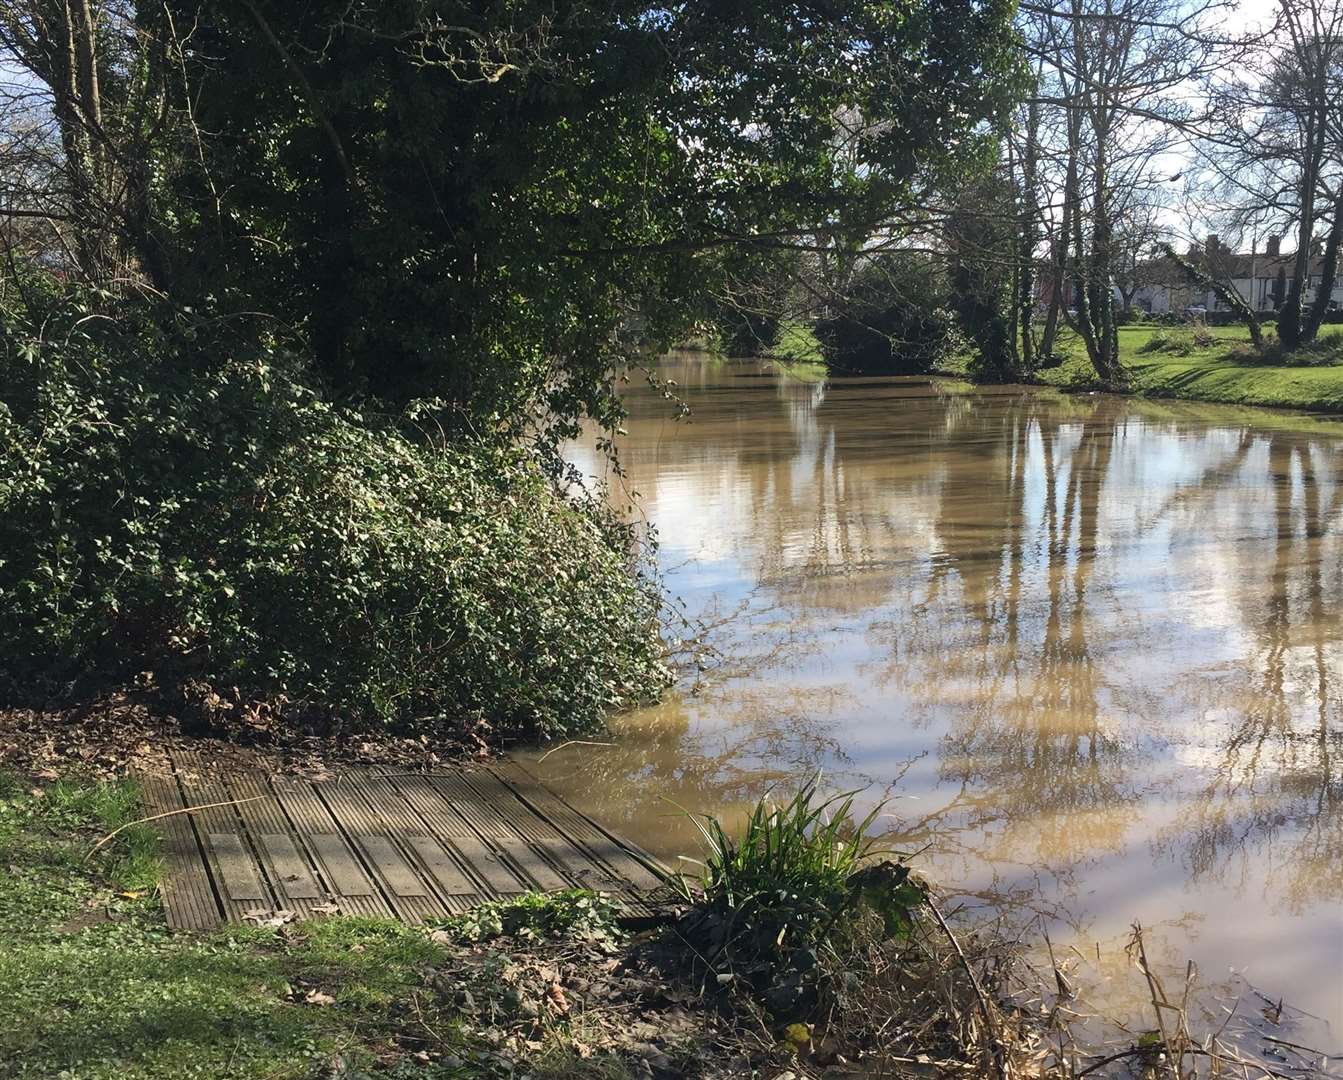 The Royal Military Canal in Hythe is spilling over